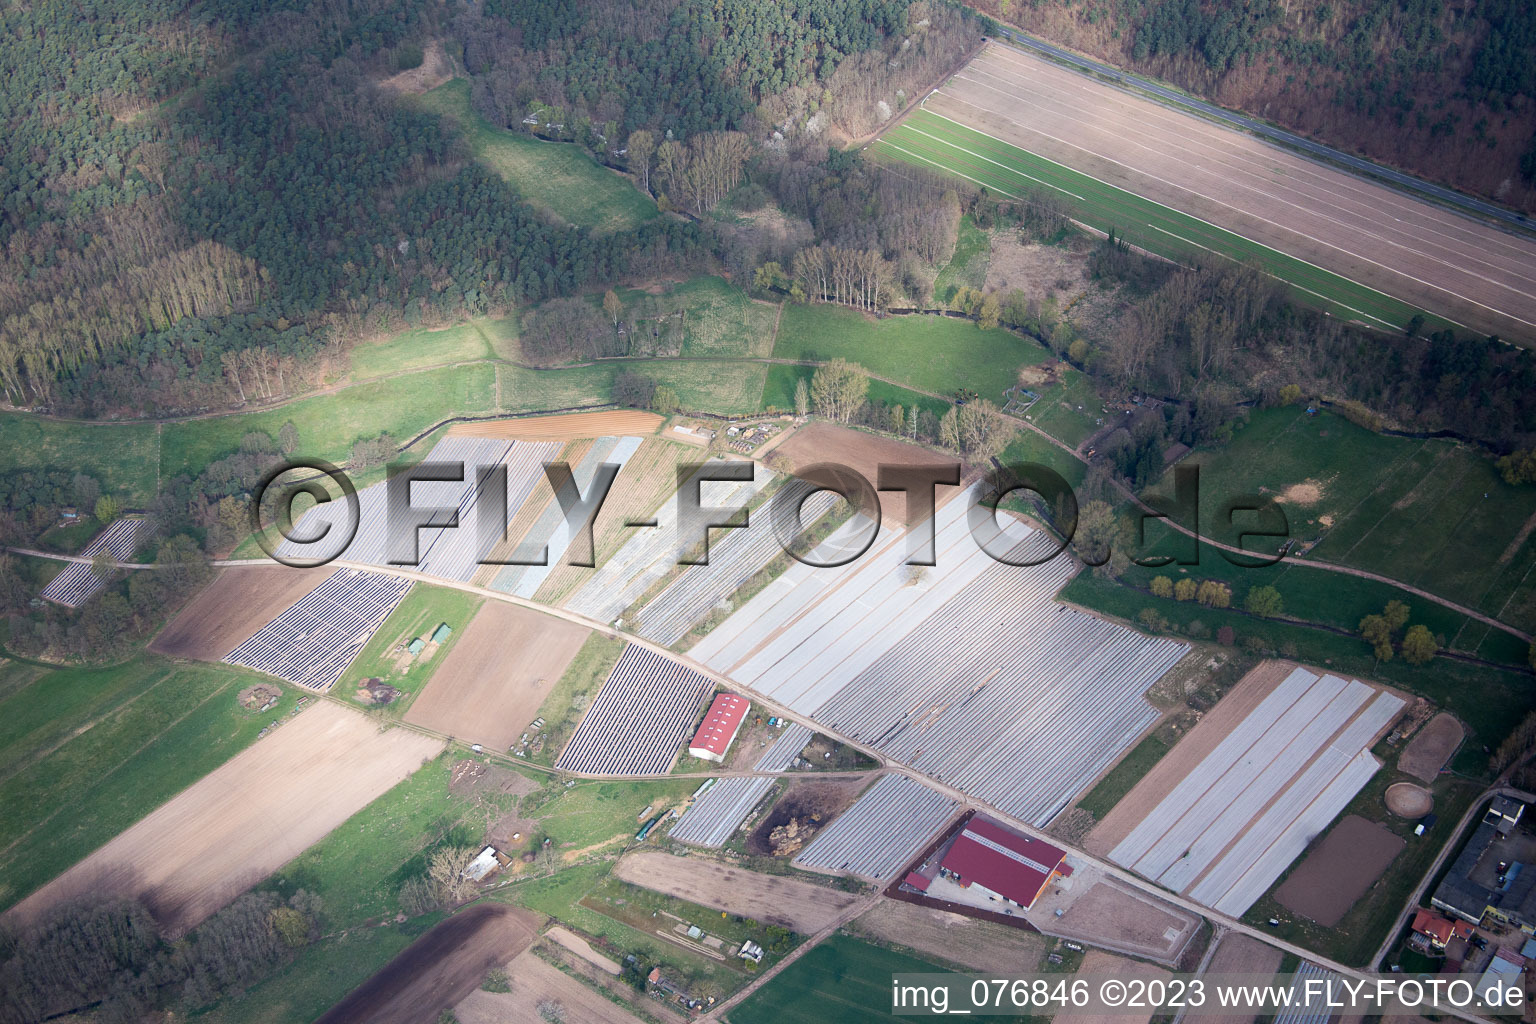 Aerial photograpy of Dudenhofen in the state Rhineland-Palatinate, Germany